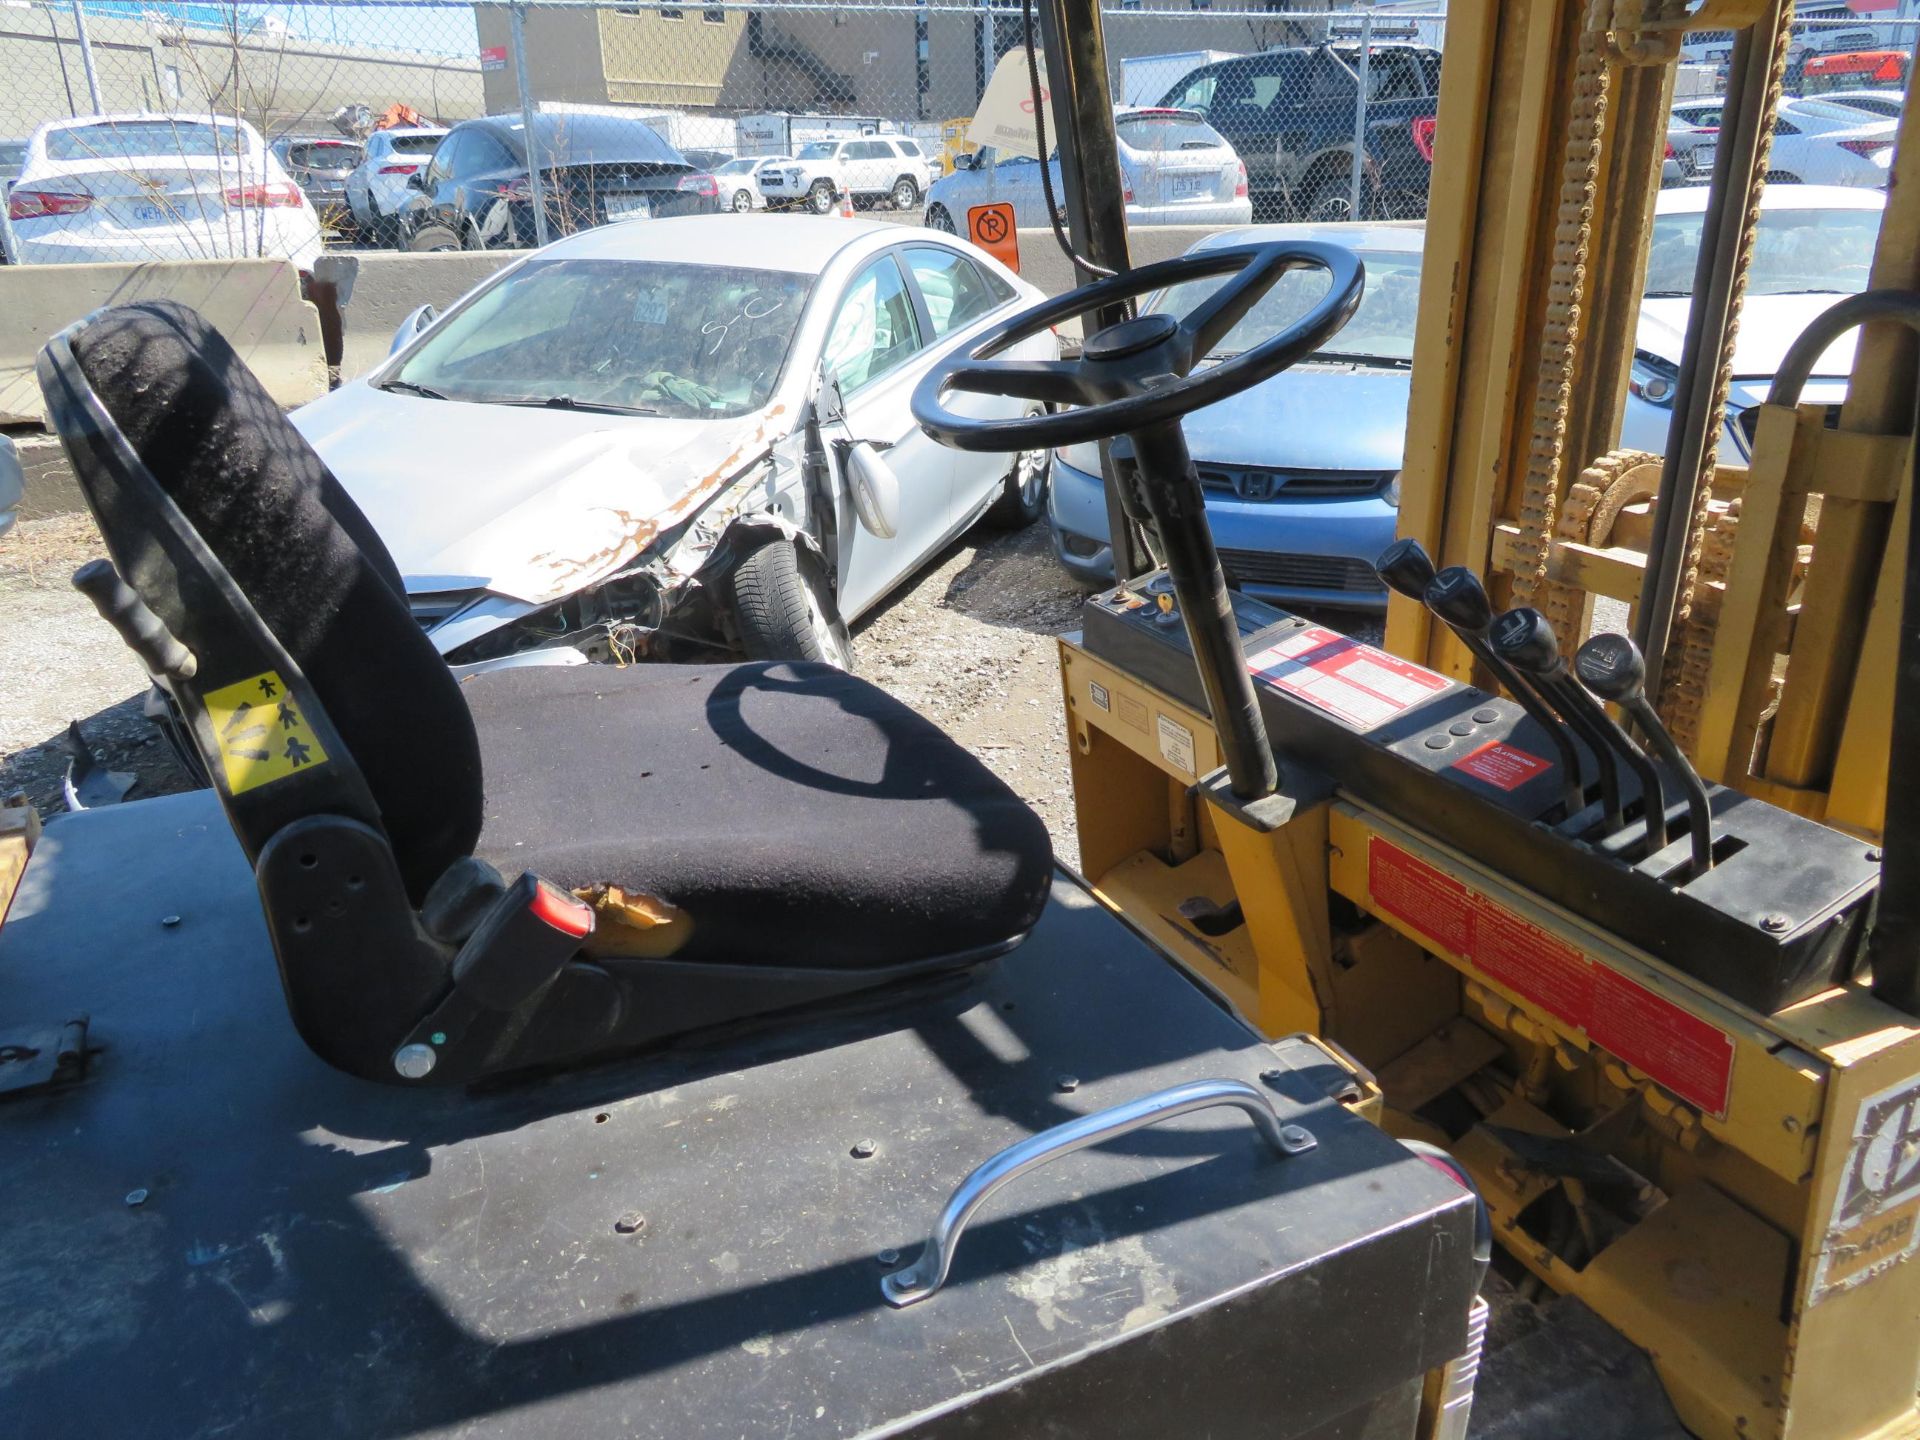 CATERPILLAR electric fork lift, Mod# M408, cap: 4,000 LBS, 3 sections, side shift, 36/48 Volts, - Image 5 of 12